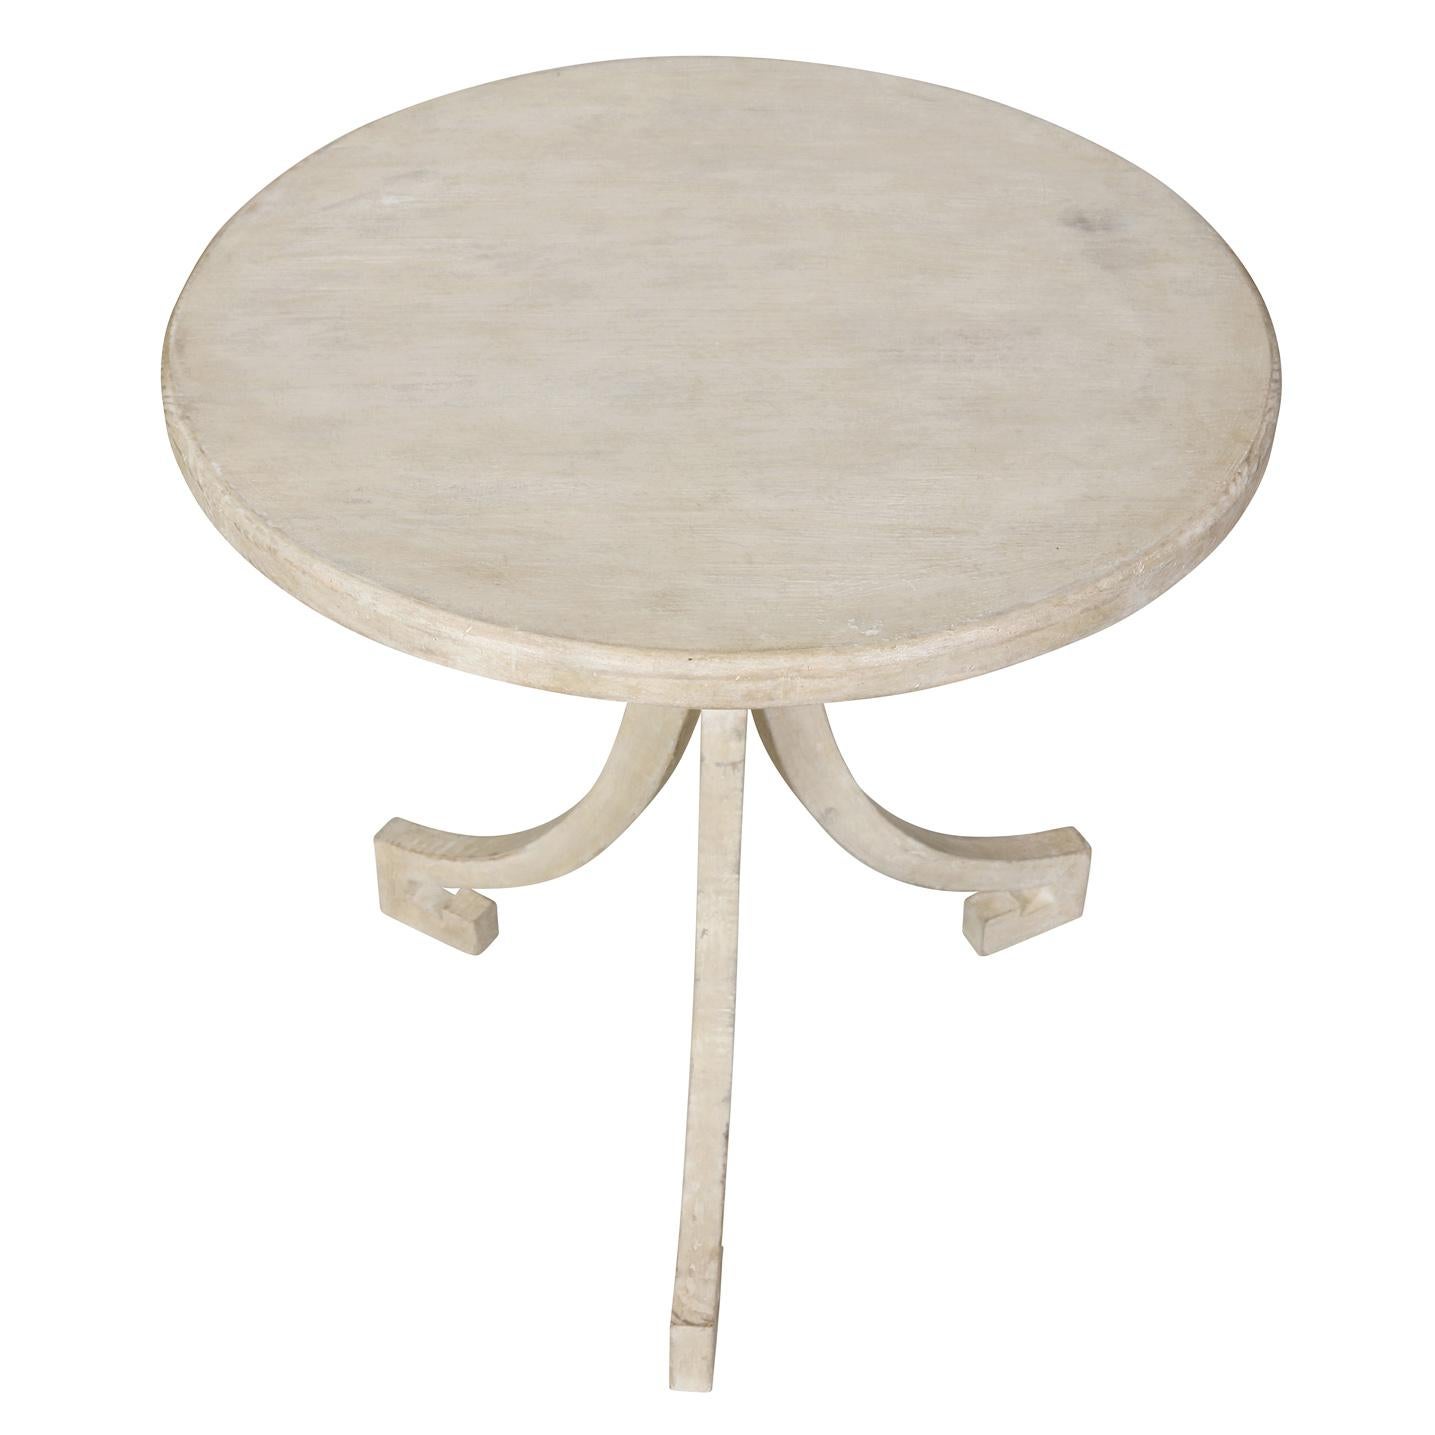 Neoclassical A Round Painted Side Table with Tripod Legs